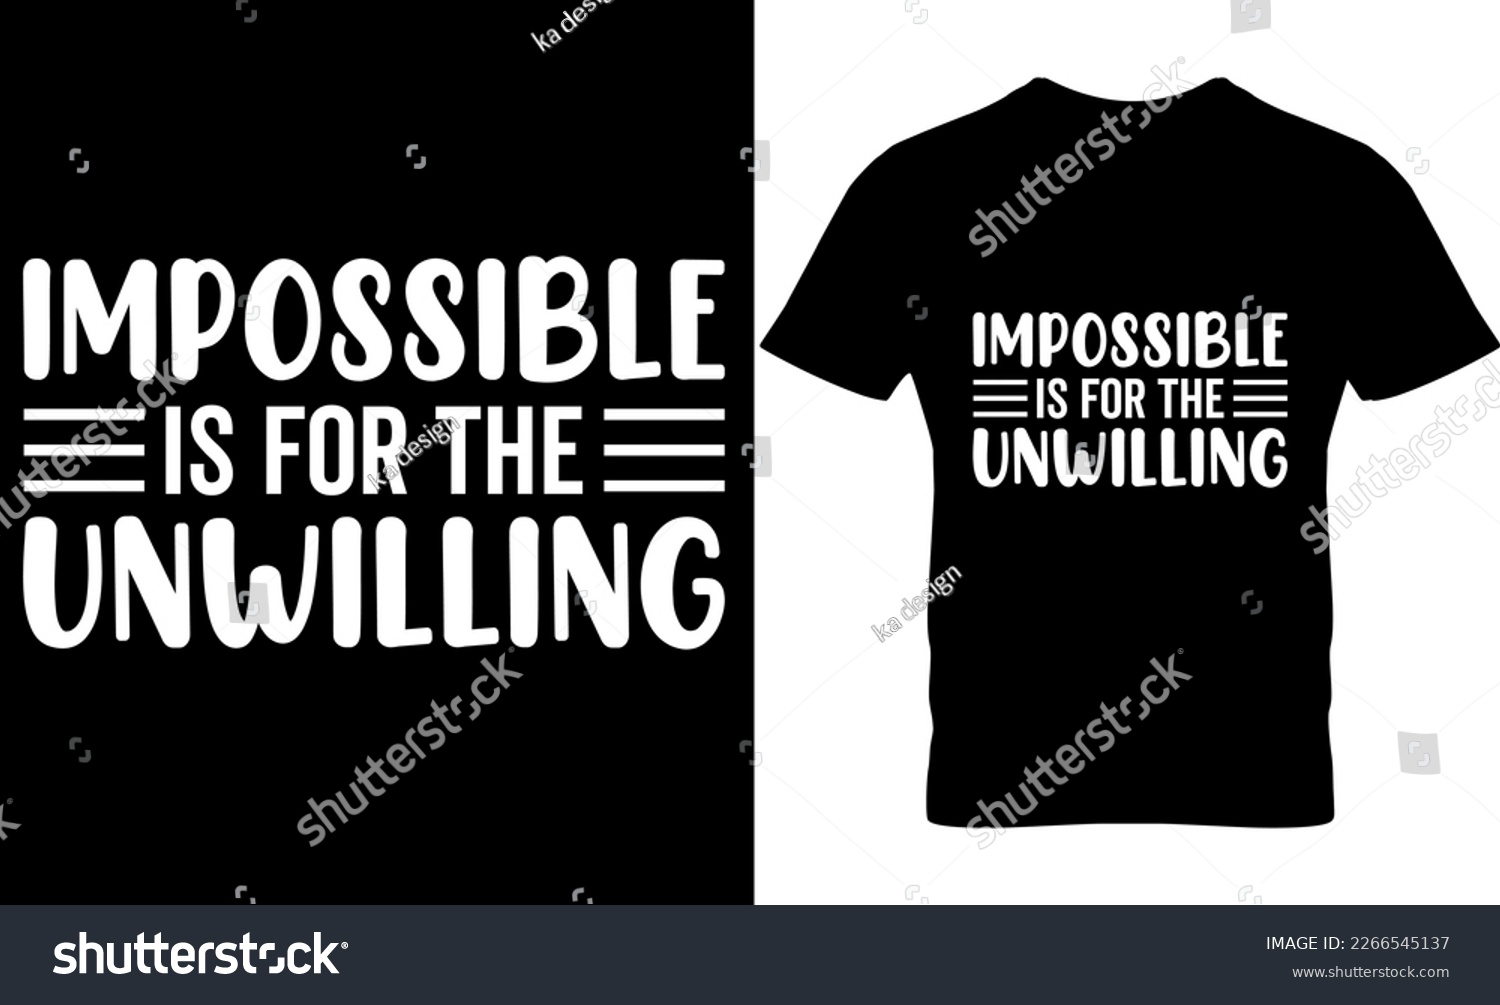 SVG of impossible is for the unwilling,  Graphic, illustration, vector, typography, motivational, inspiration, inspiration t-shirt design, Typography t-shirt design, motivational t-shirt design, svg